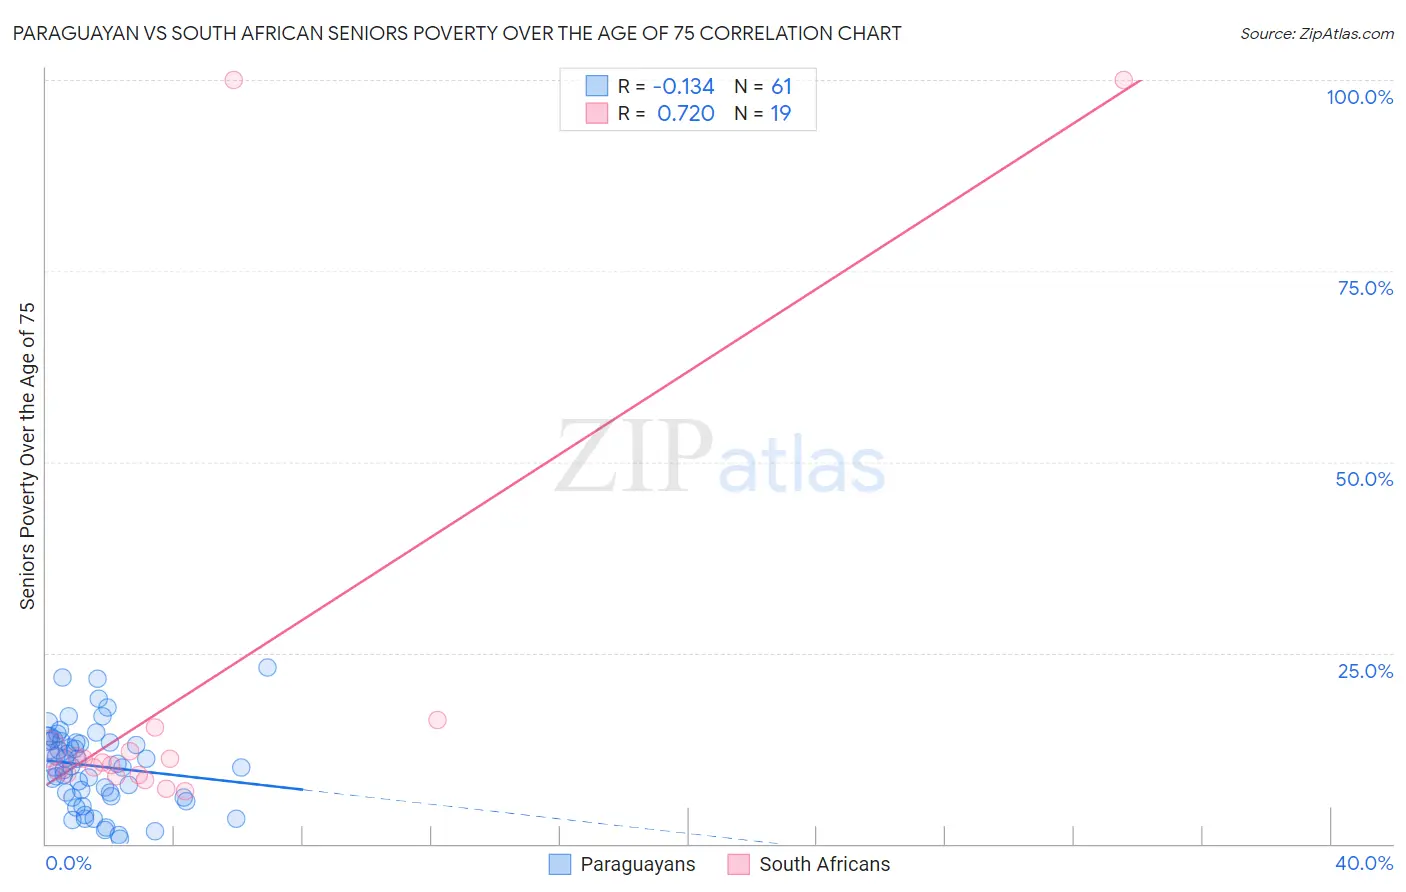 Paraguayan vs South African Seniors Poverty Over the Age of 75